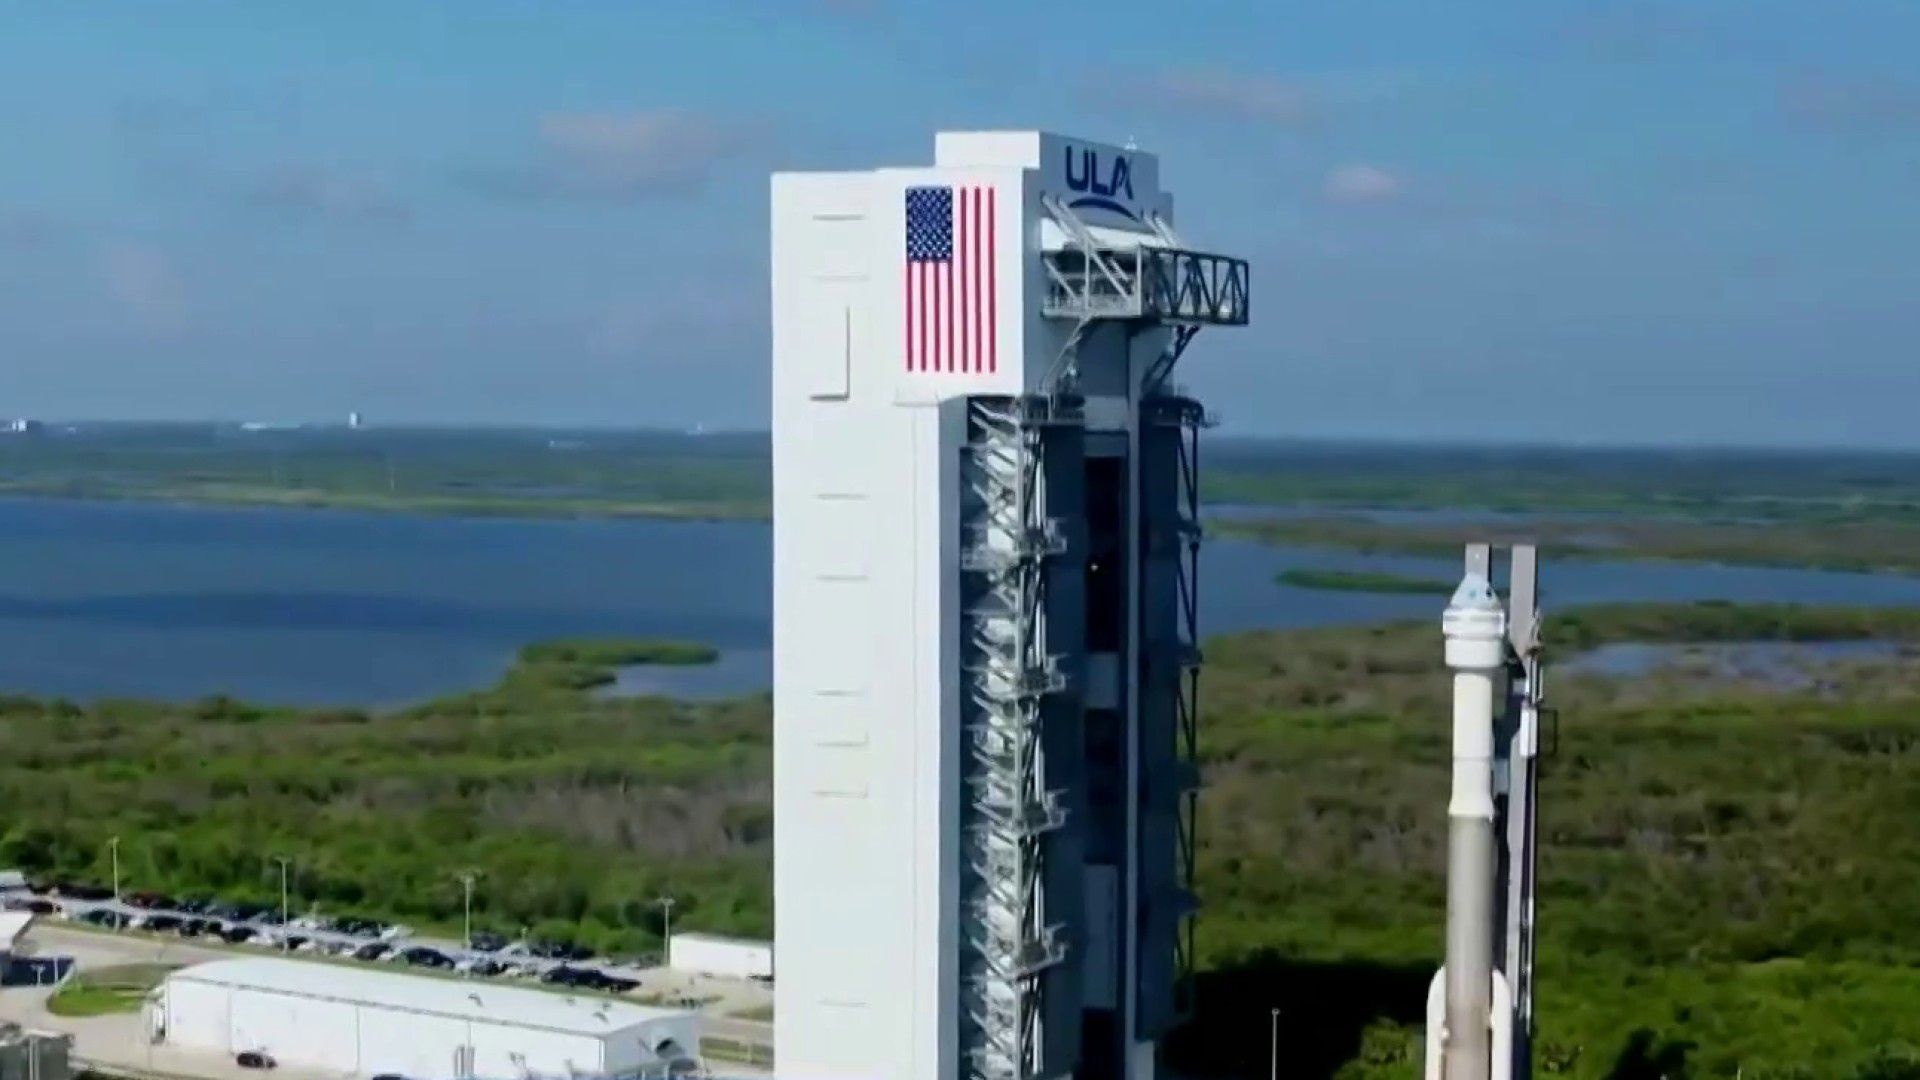 WATCH LIVE: NASA coverage of Starliner launch